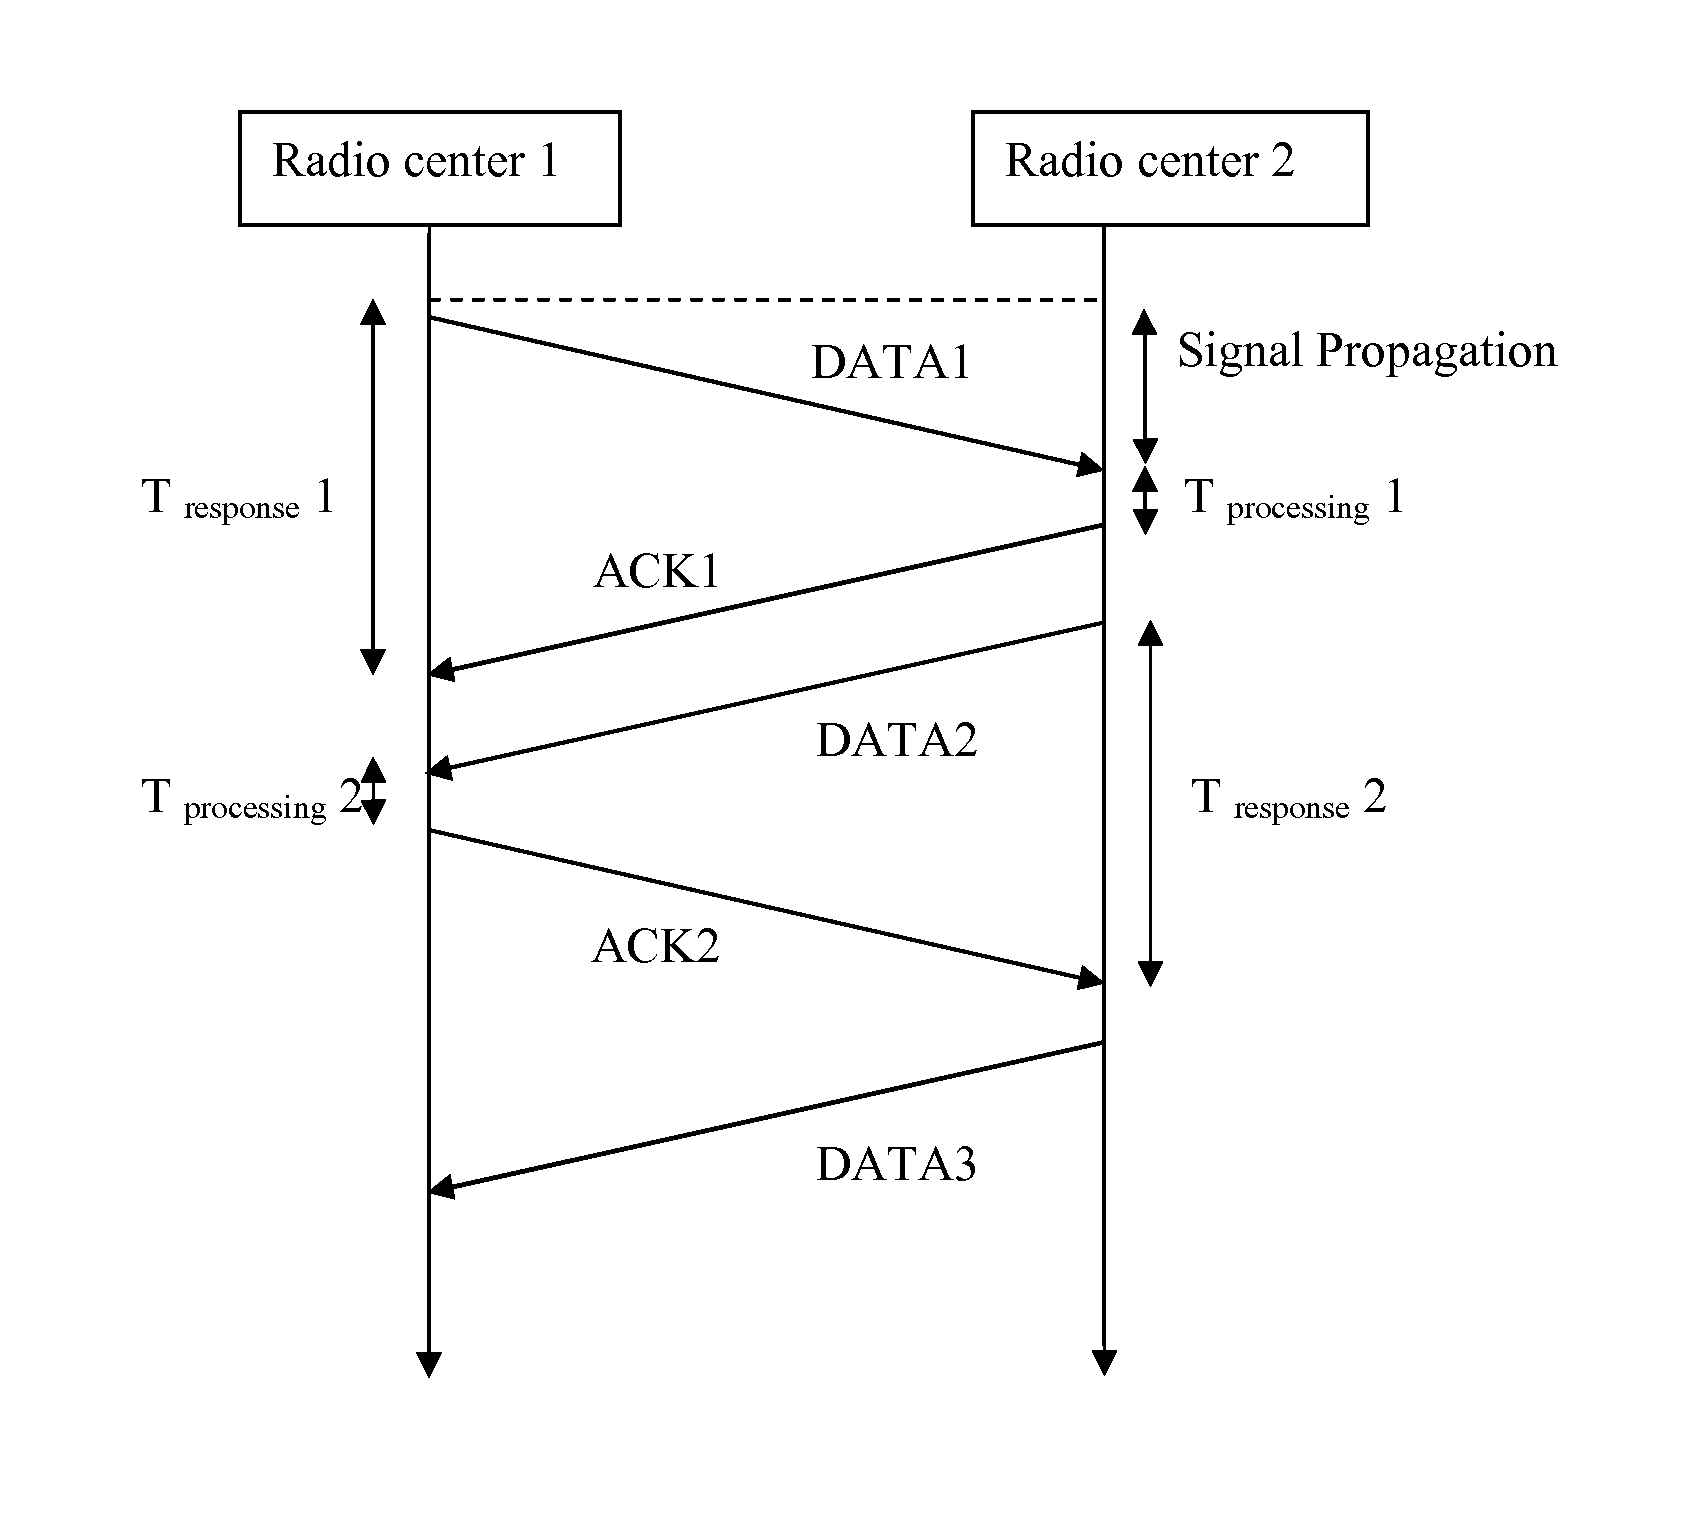 Method for locating a radio center and system for locating a radio center and data processing unit